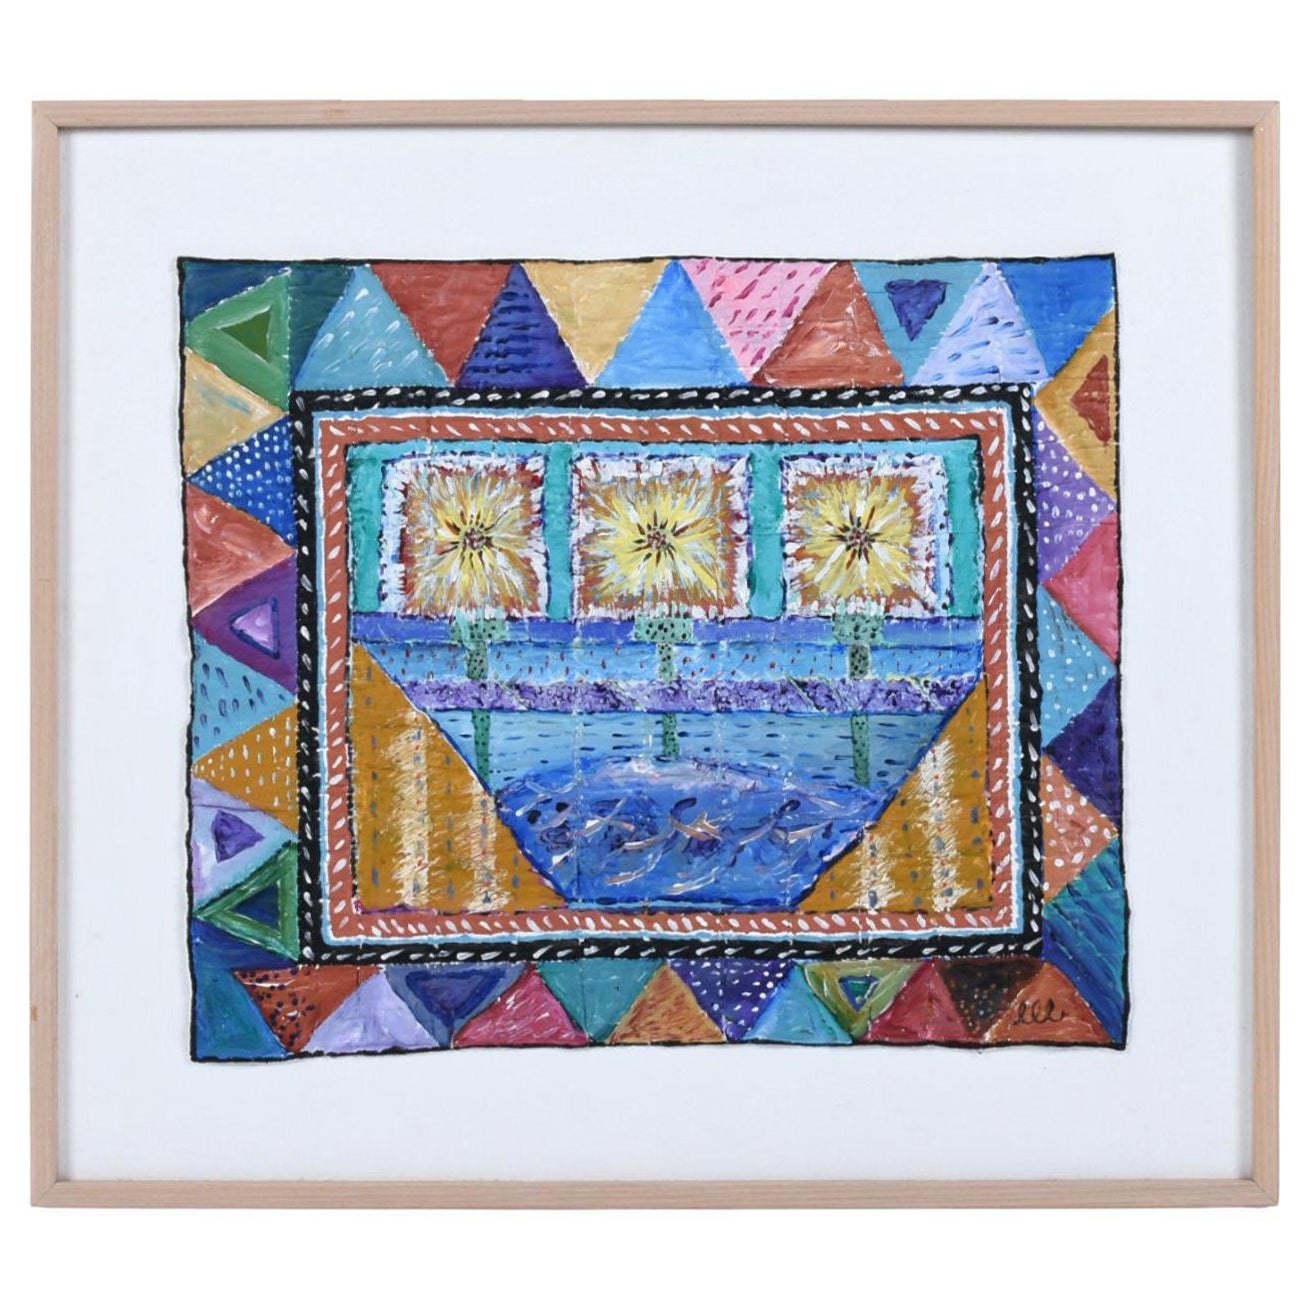 Contemporary Framed Quilted Textile Art Painting on Canvas For Sale